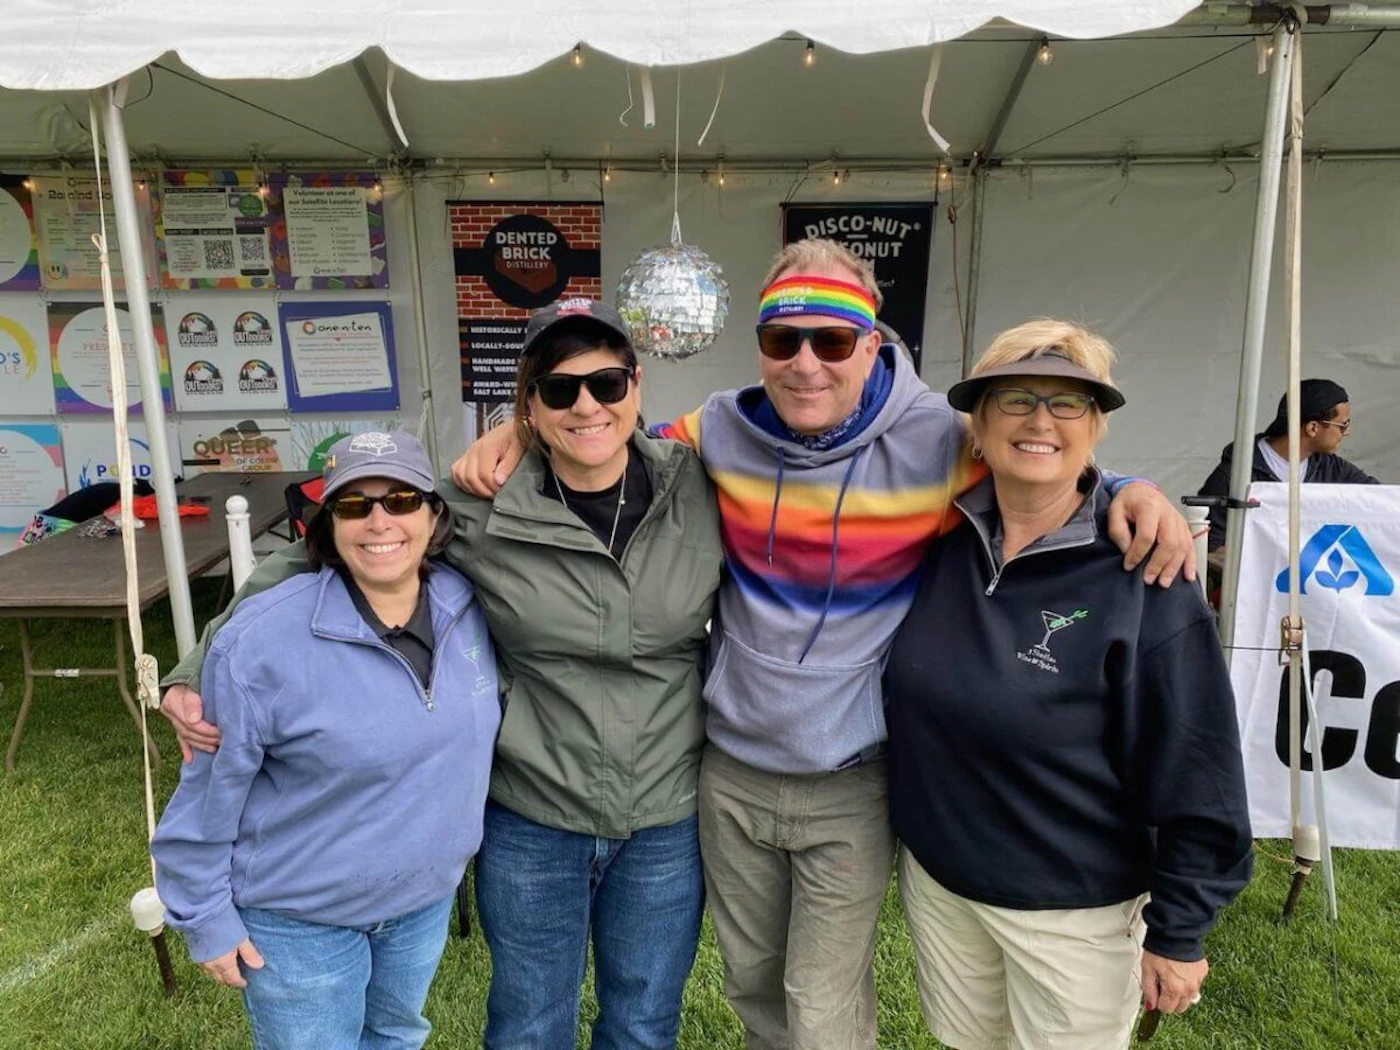 From left: Nancy Mangone, Joanne Spencer, Marc Christenson from Dented Brick Distillery, and 3 Sheilas Brand Ambassador Jane Crafter at the 2022 Pride in the Pines in Flagstaff. (Photo courtesy of Nancy Mangone)